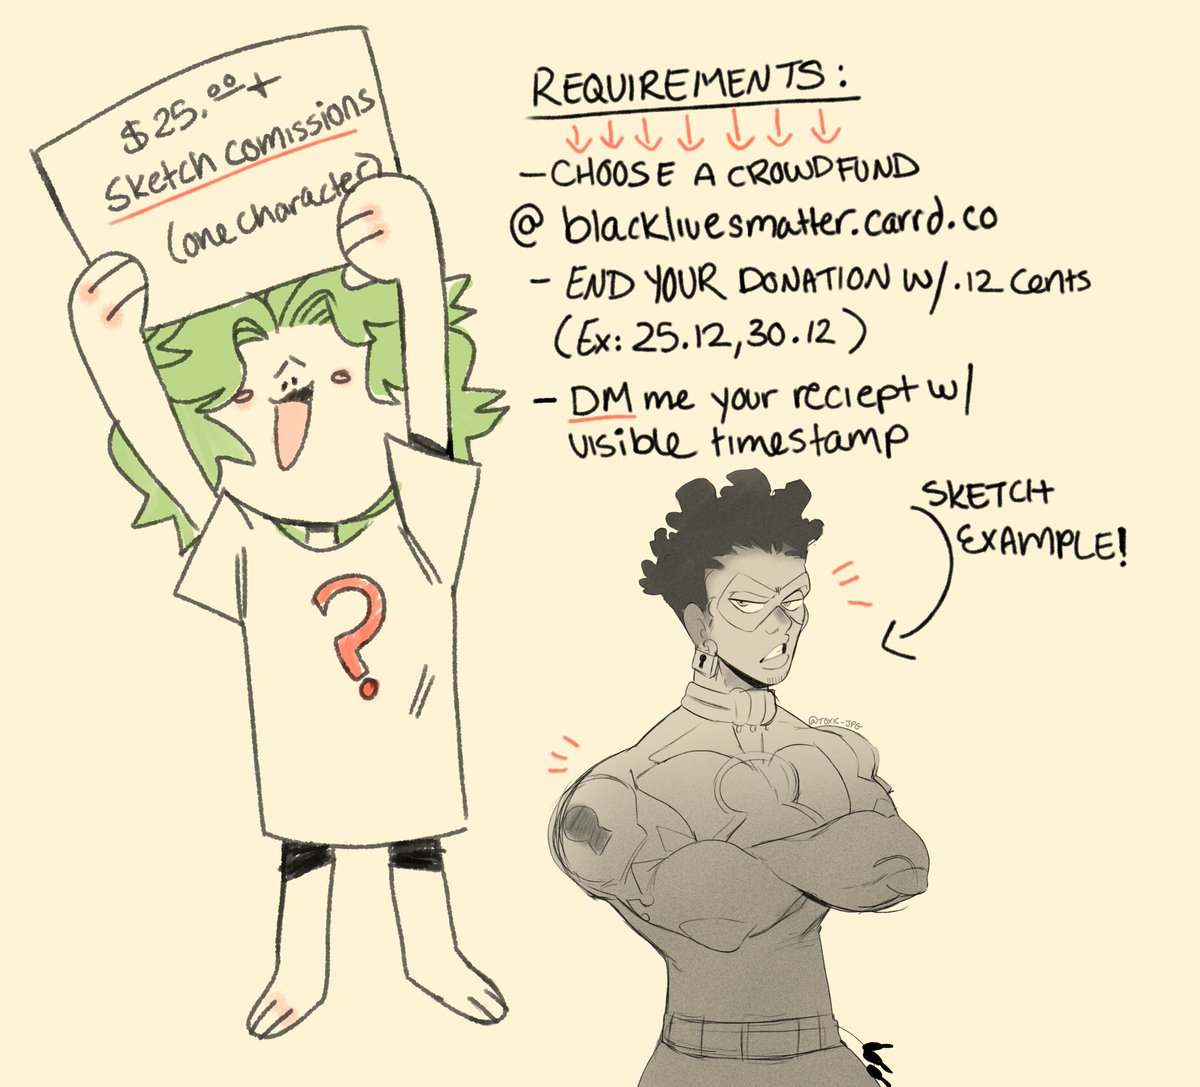 I am doing donation based commissions for #BlackLivesMatter protesters and black people in need!! Please follow the requirements and DM me if you are interested or have any questions!! <3 <3 slots are open till further notice!

https://t.co/AT8yNFZASk 